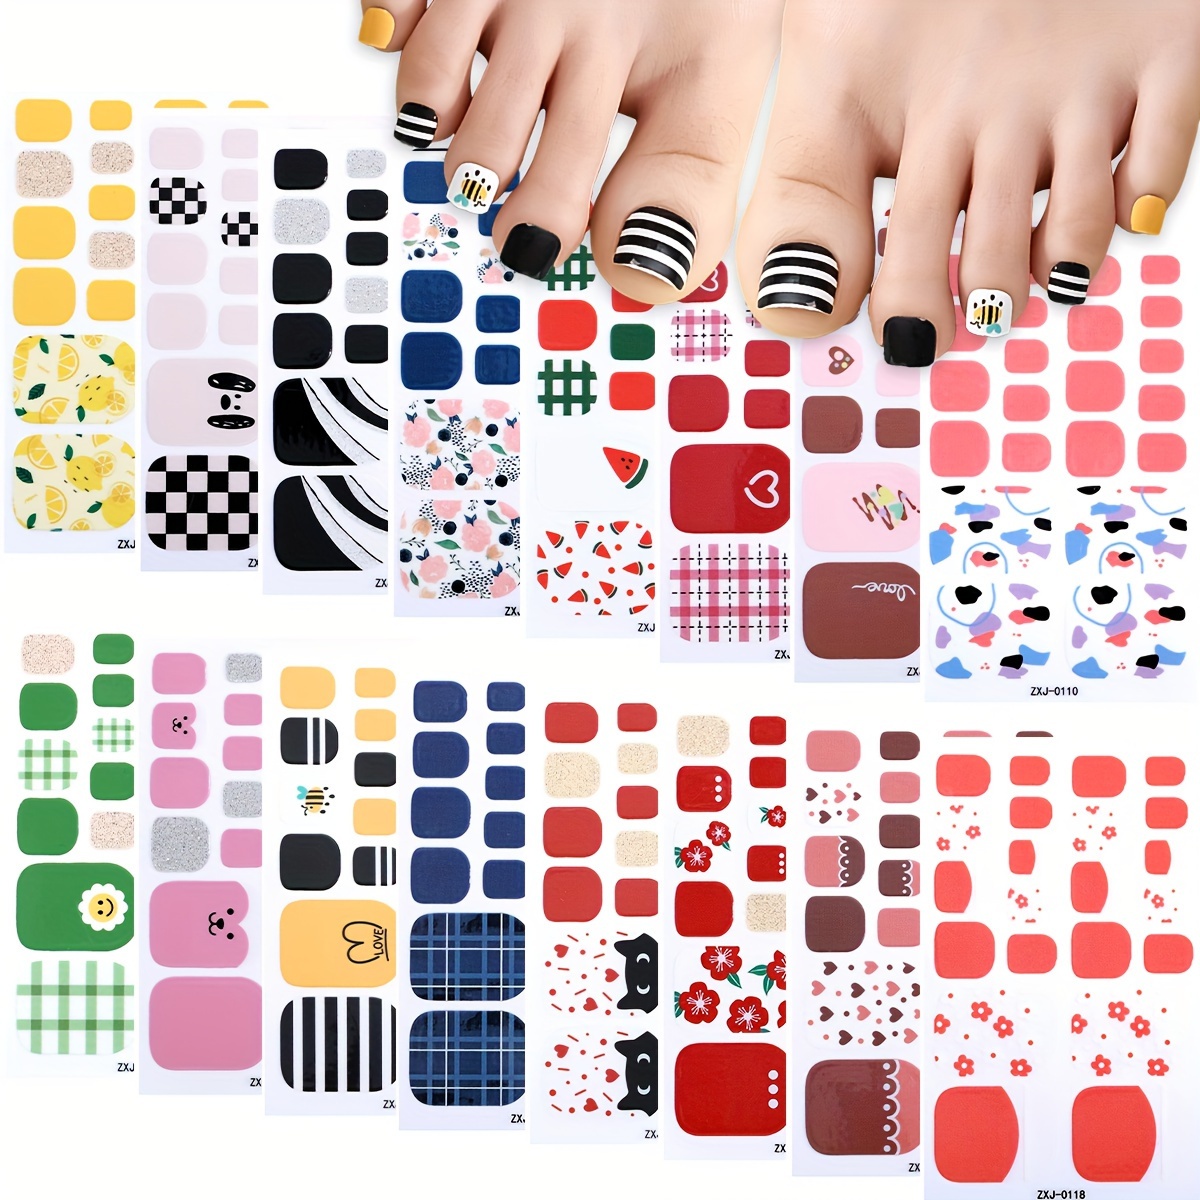 

16 Sheets Toe Nail Stickers Spring Summer Flower Fruit Design Full Nail Wraps Self Adhesive Toenail Polish Strips Toes Nail Stickers Toenail Stickers Polish Manicure Sticker 2 Nail Files